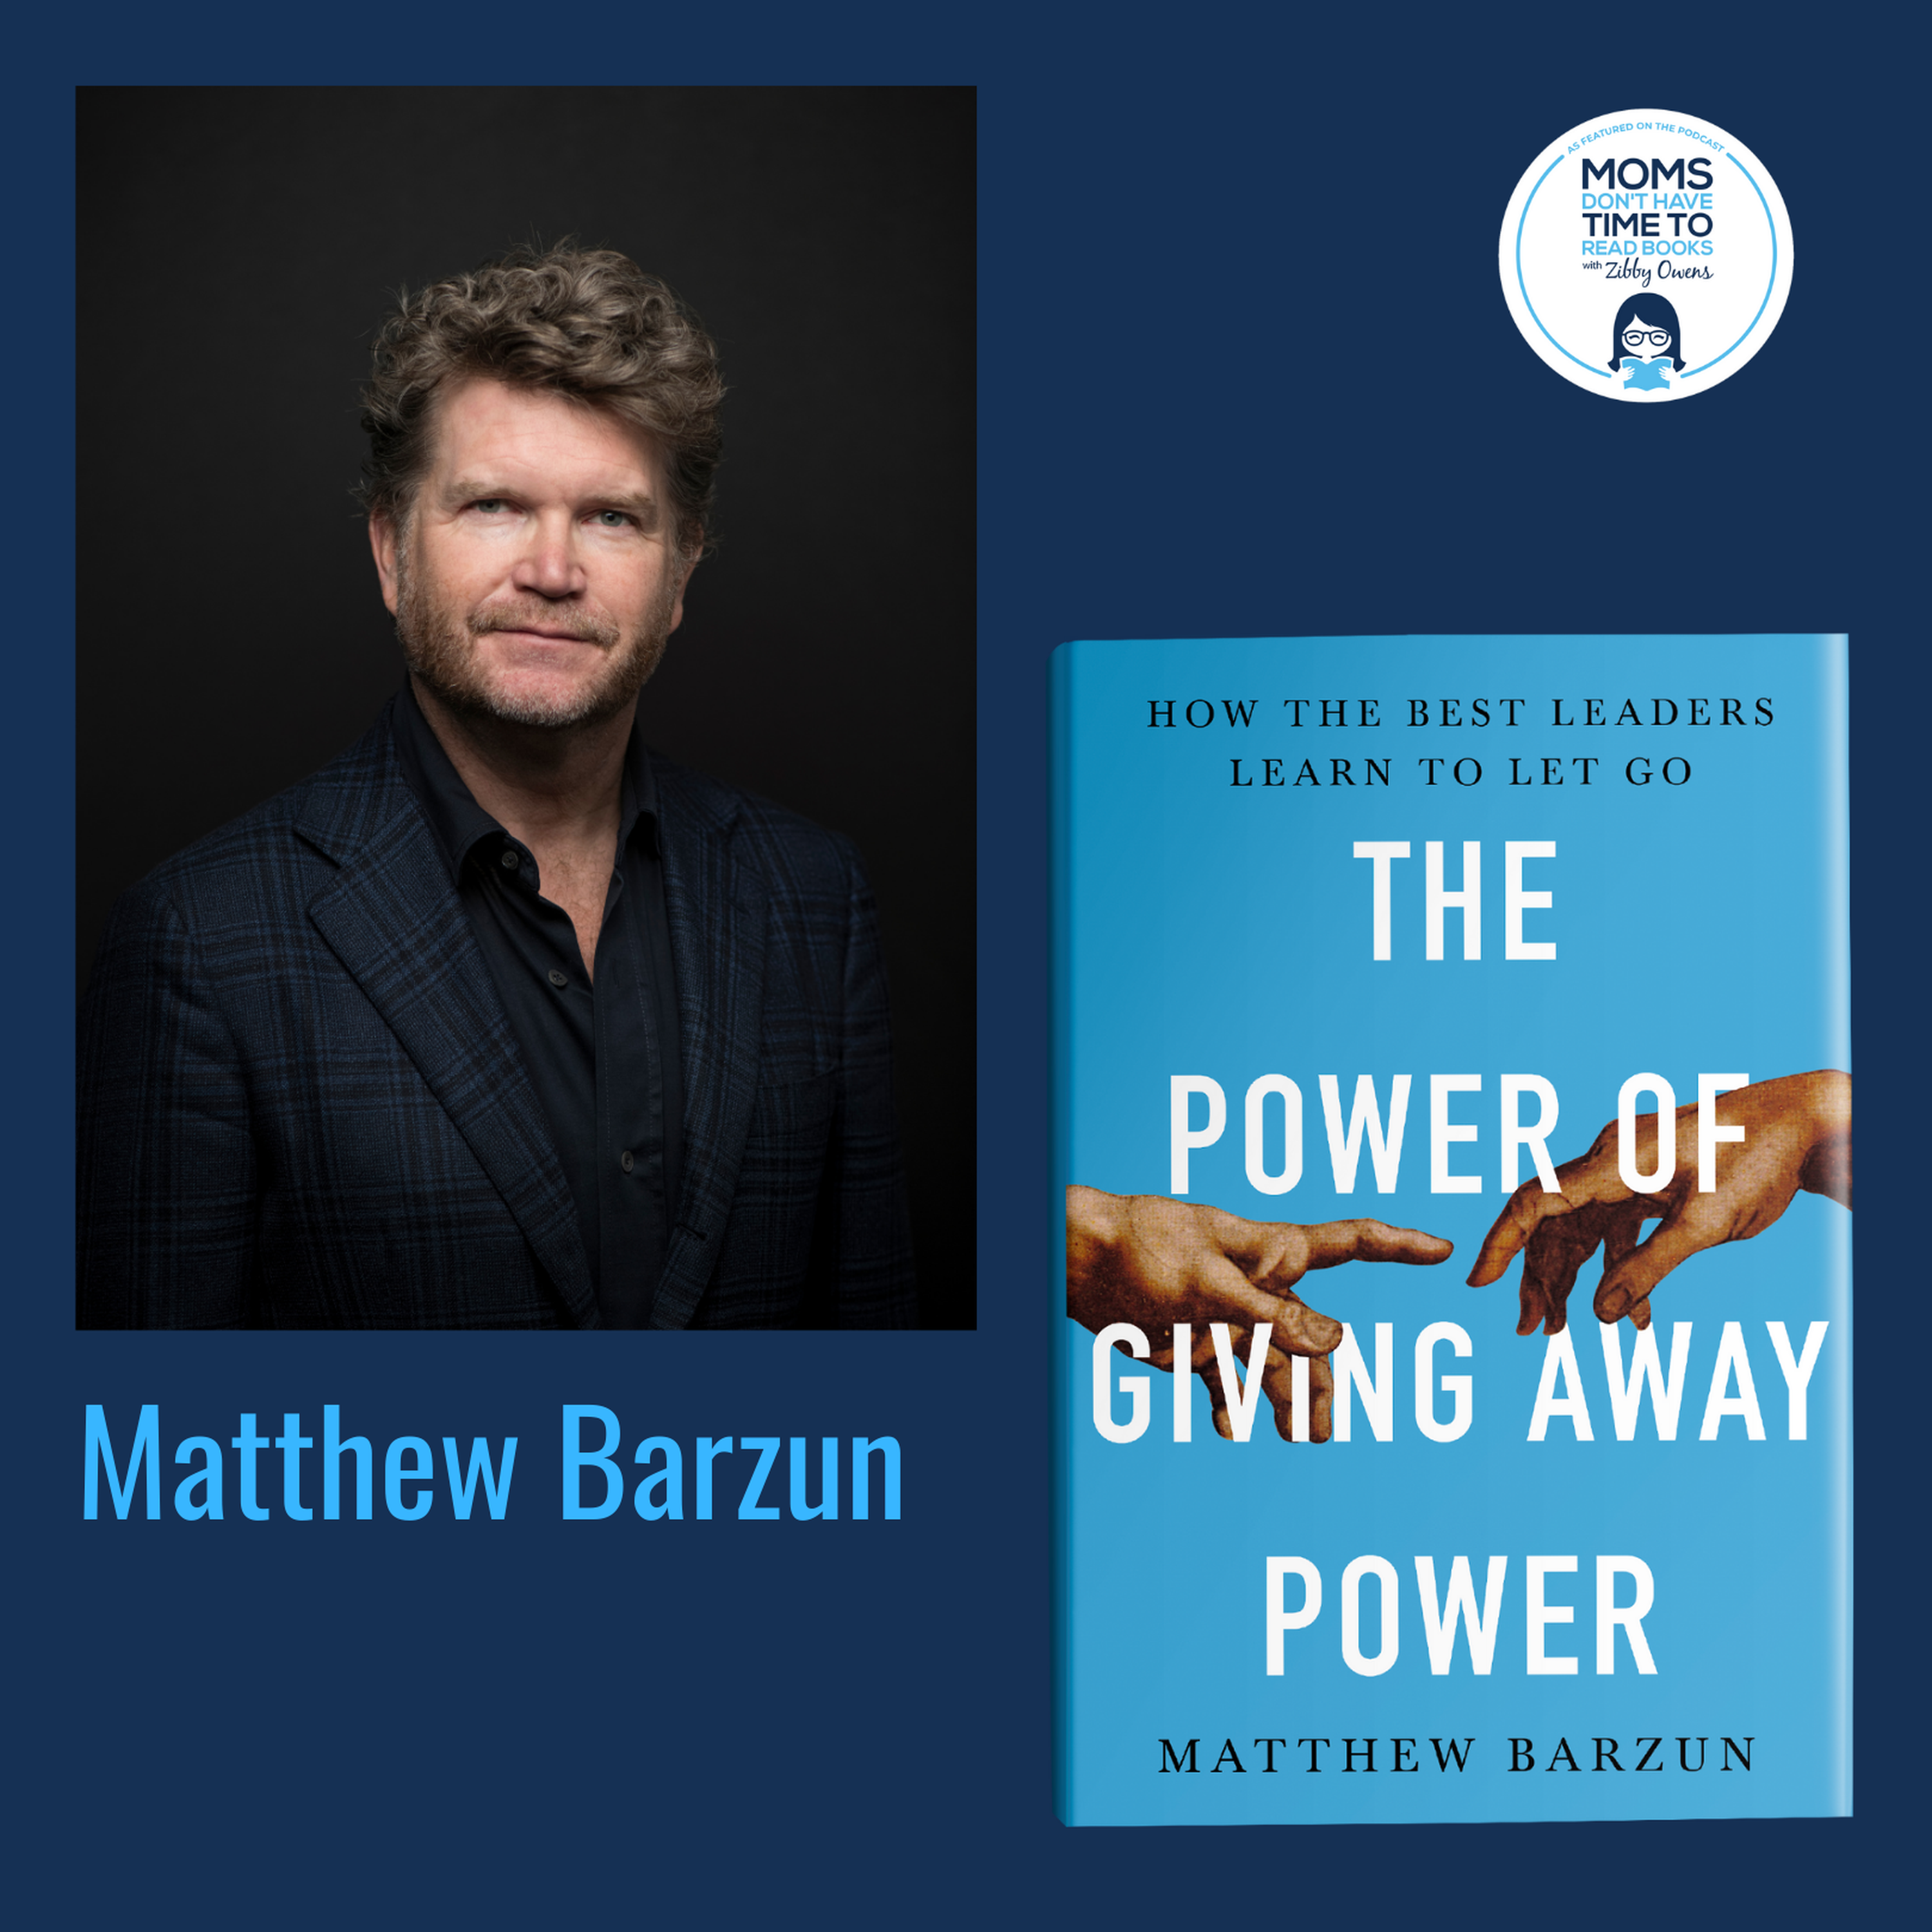 Matthew Barzun, THE POWER OF GIVING AWAY POWER: How the Best Leaders Learn to Let Go